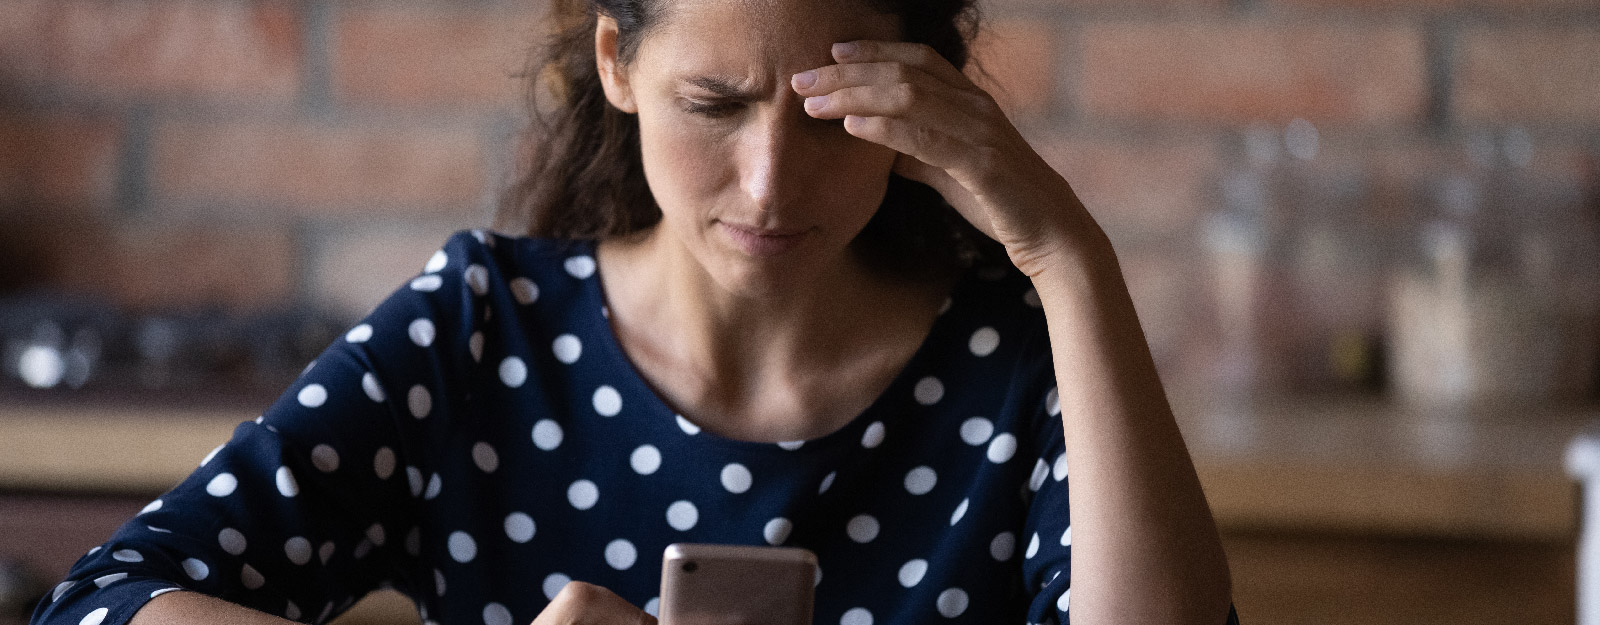 Frustrated woman looks at smartphone.